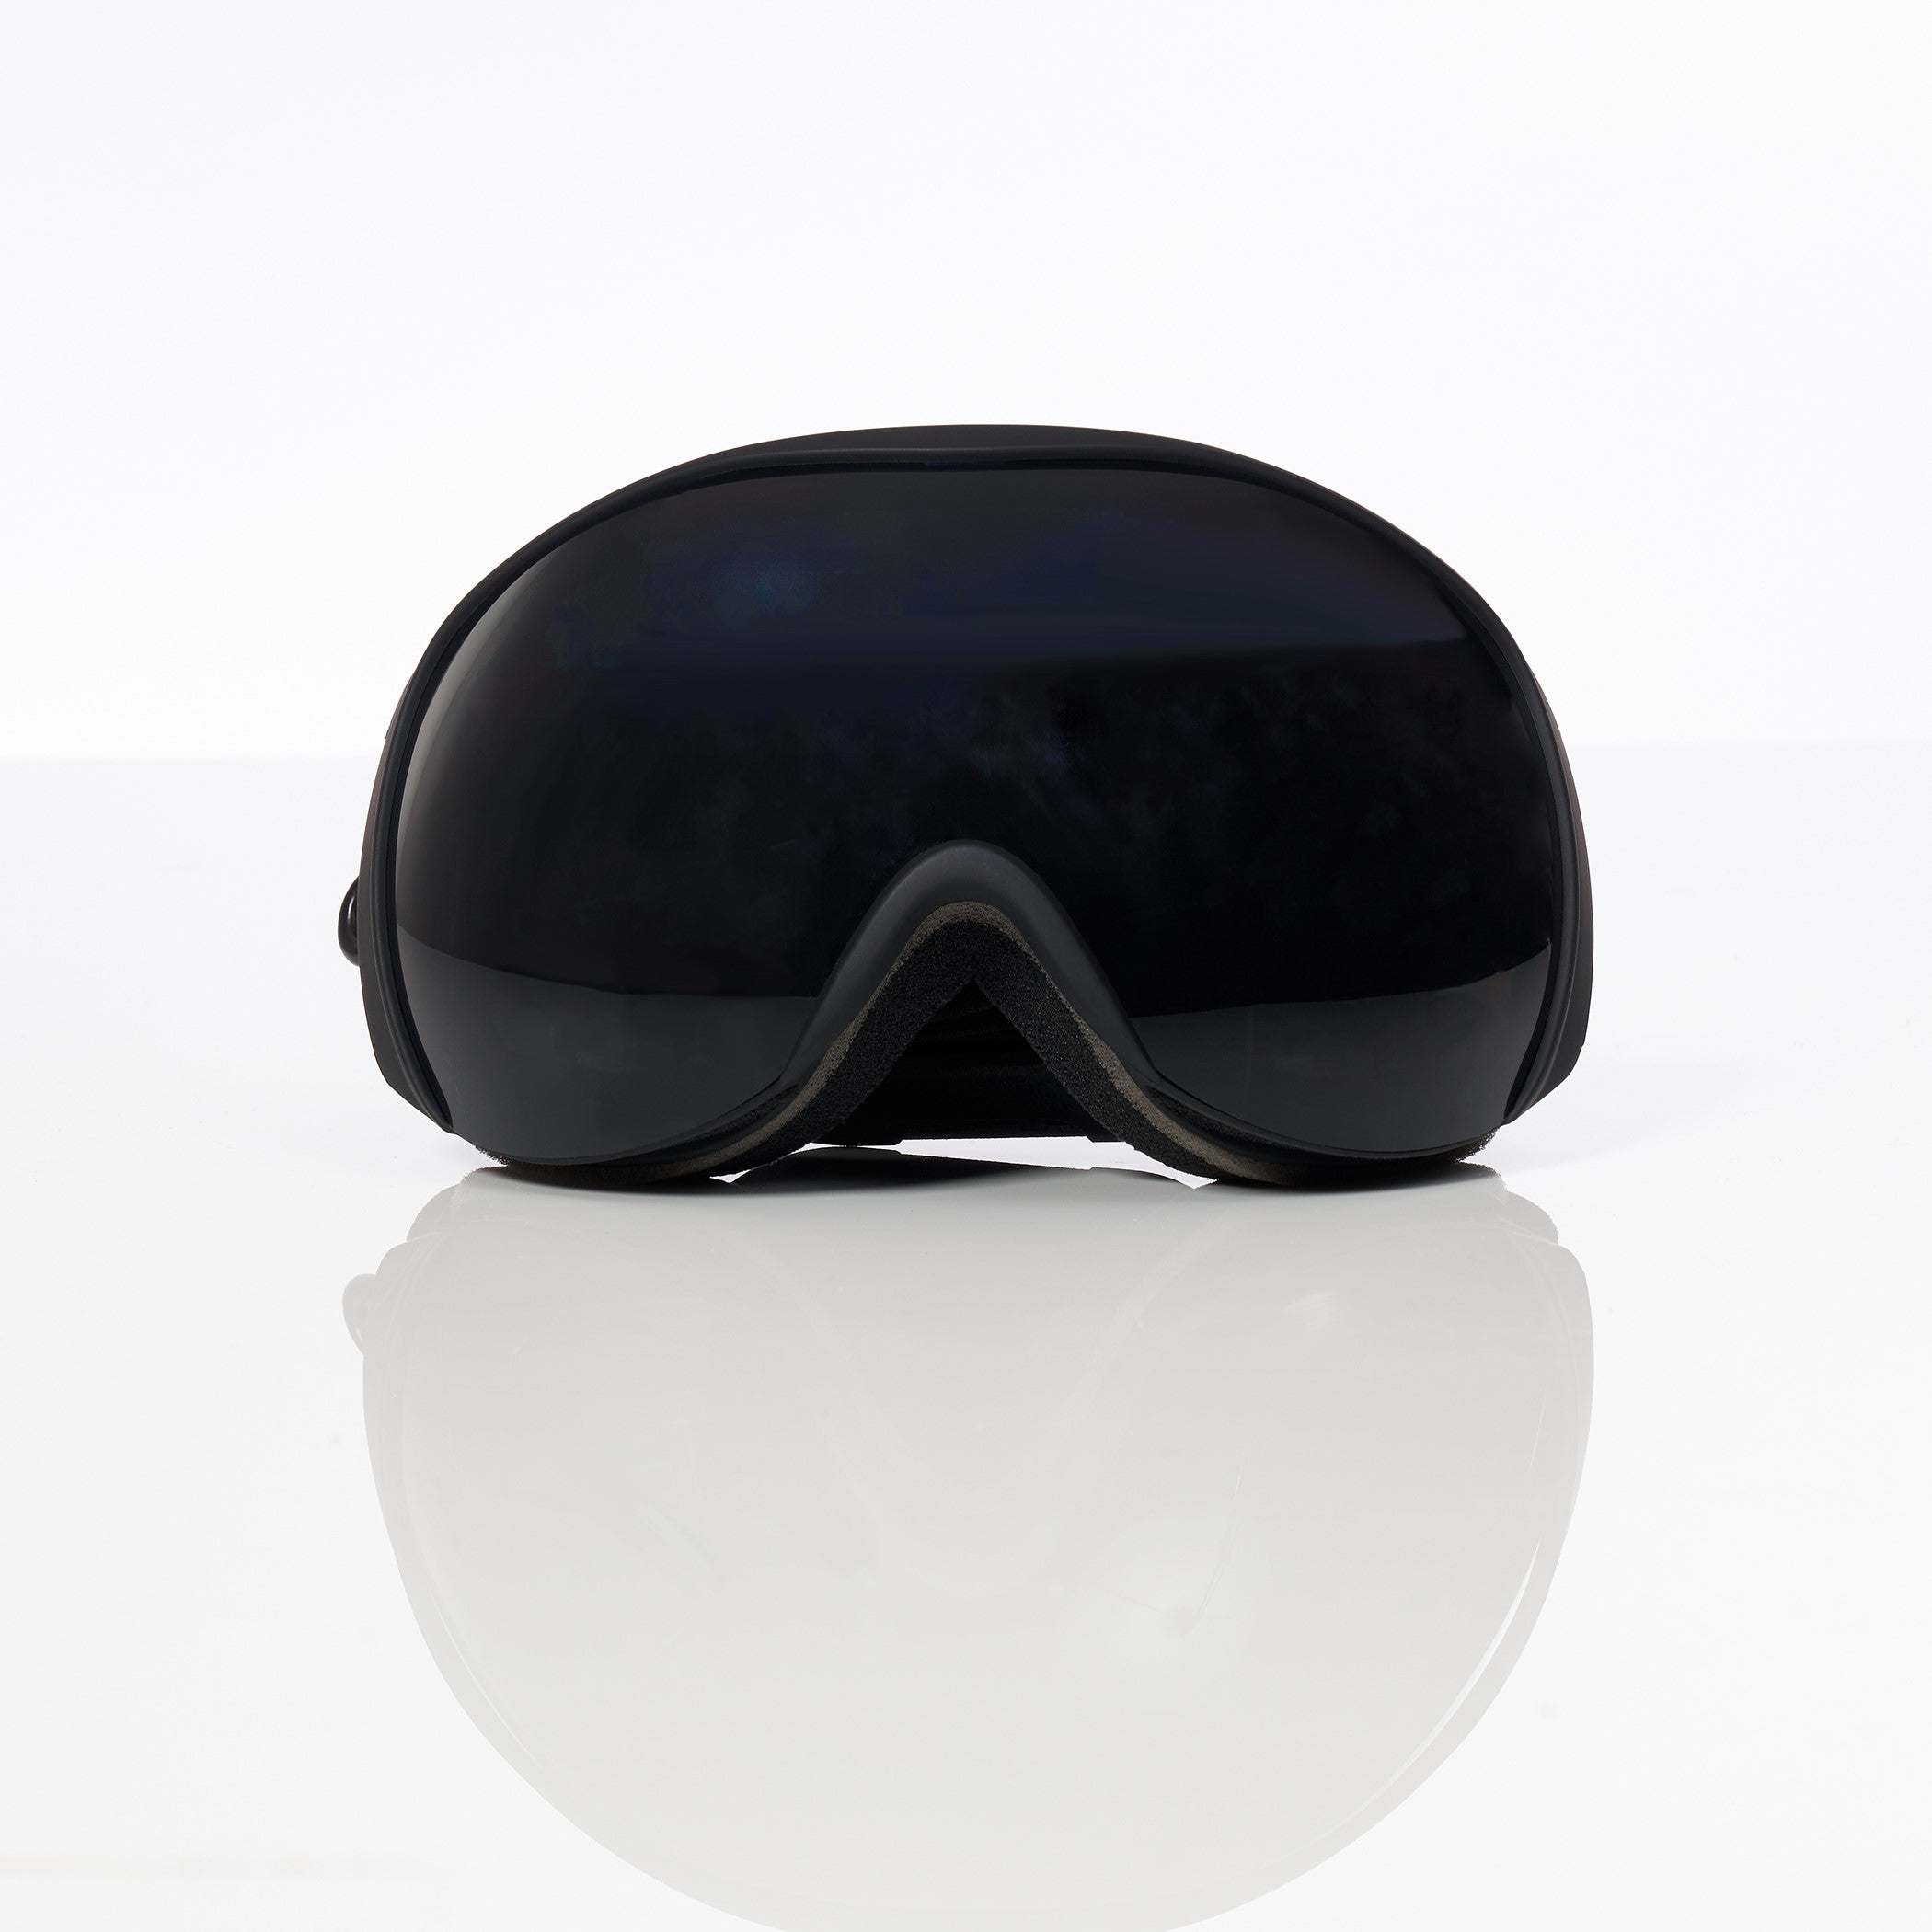 Rekkie's smart snow goggles prove that AR is useful right now